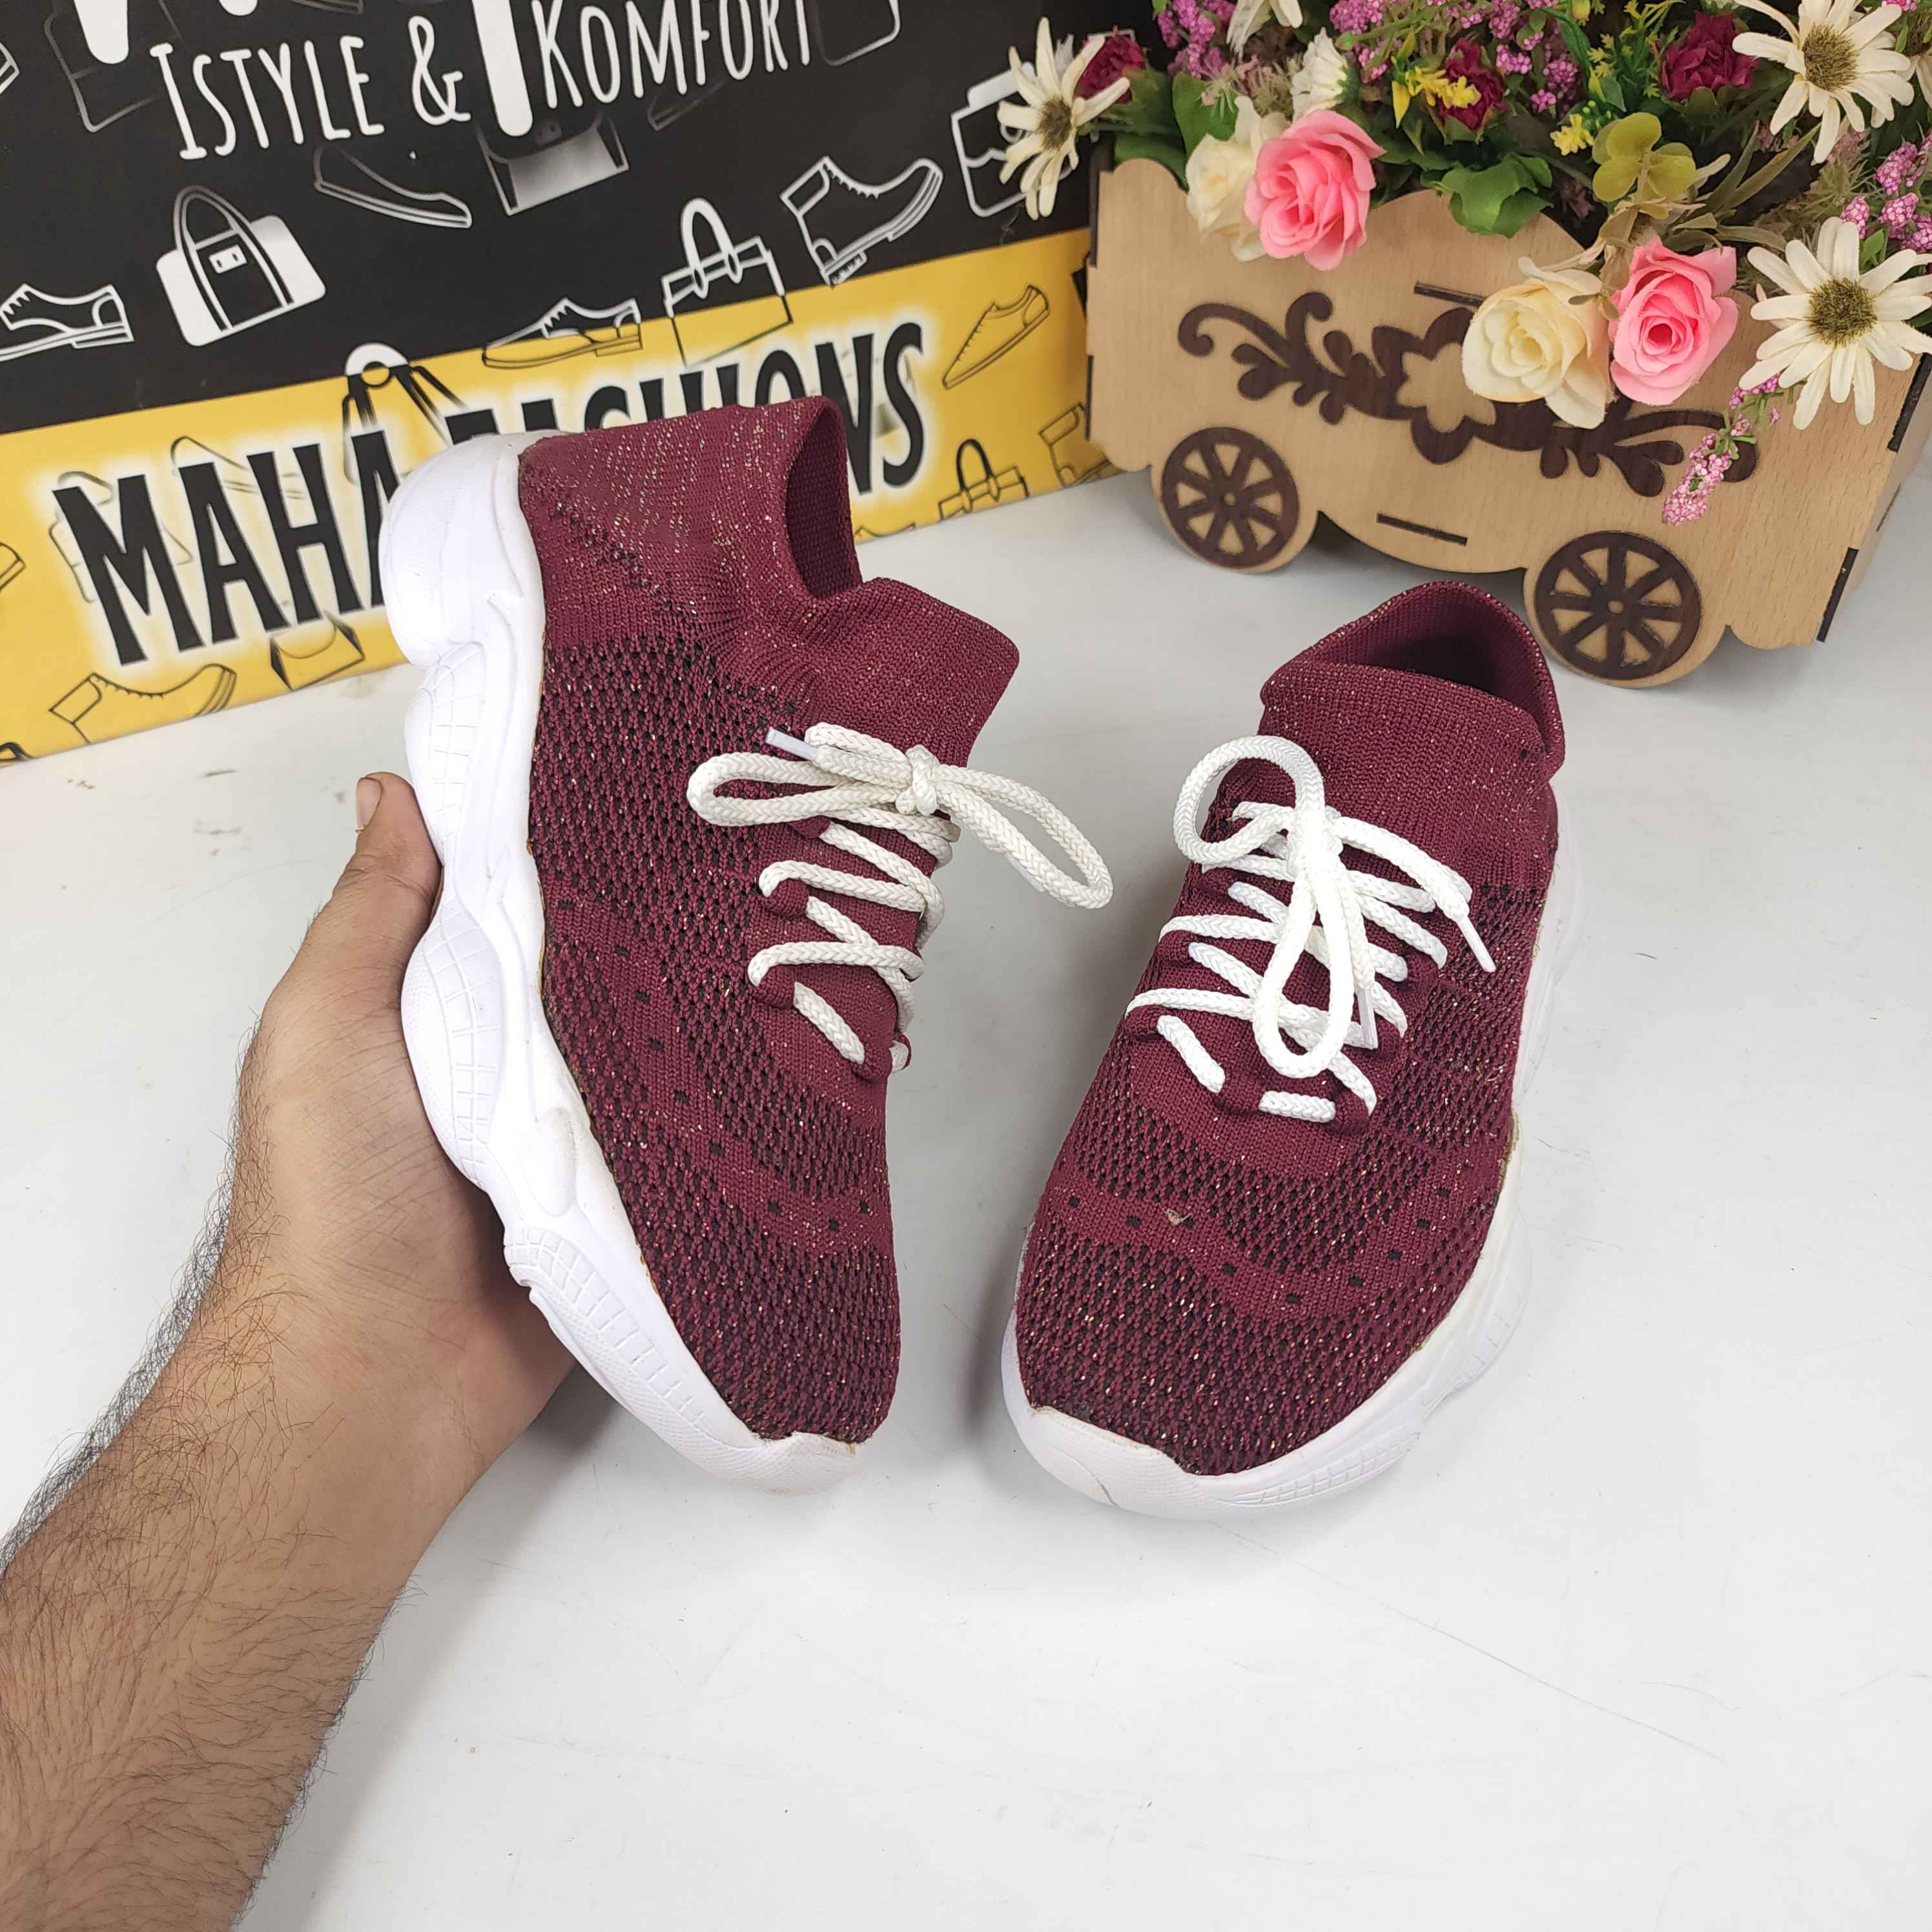 Comfy lace Shoes For Her - Maha fashions -  